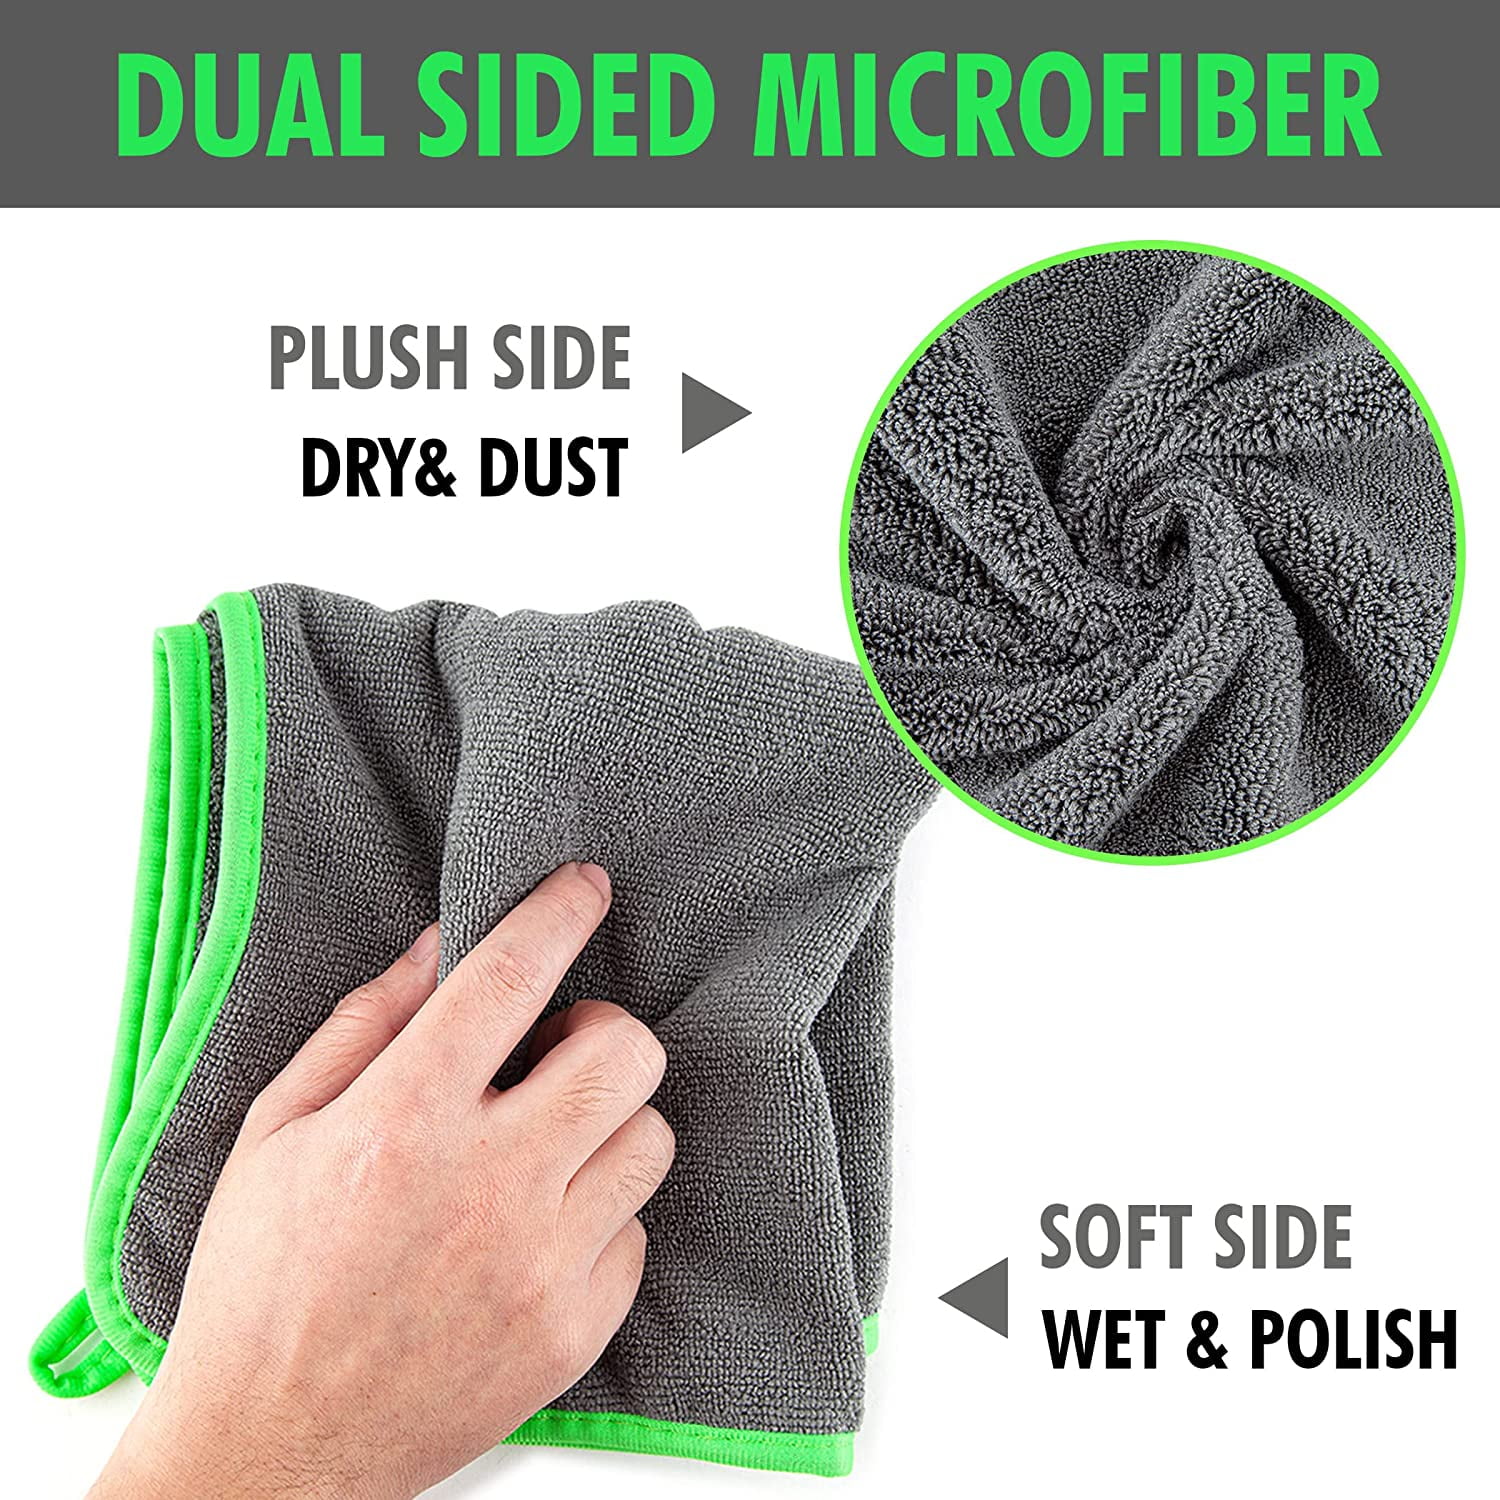 OVWO 12Pcs Premium Microfiber Cleaning Cloth for Household Cleaning, 12 x  12